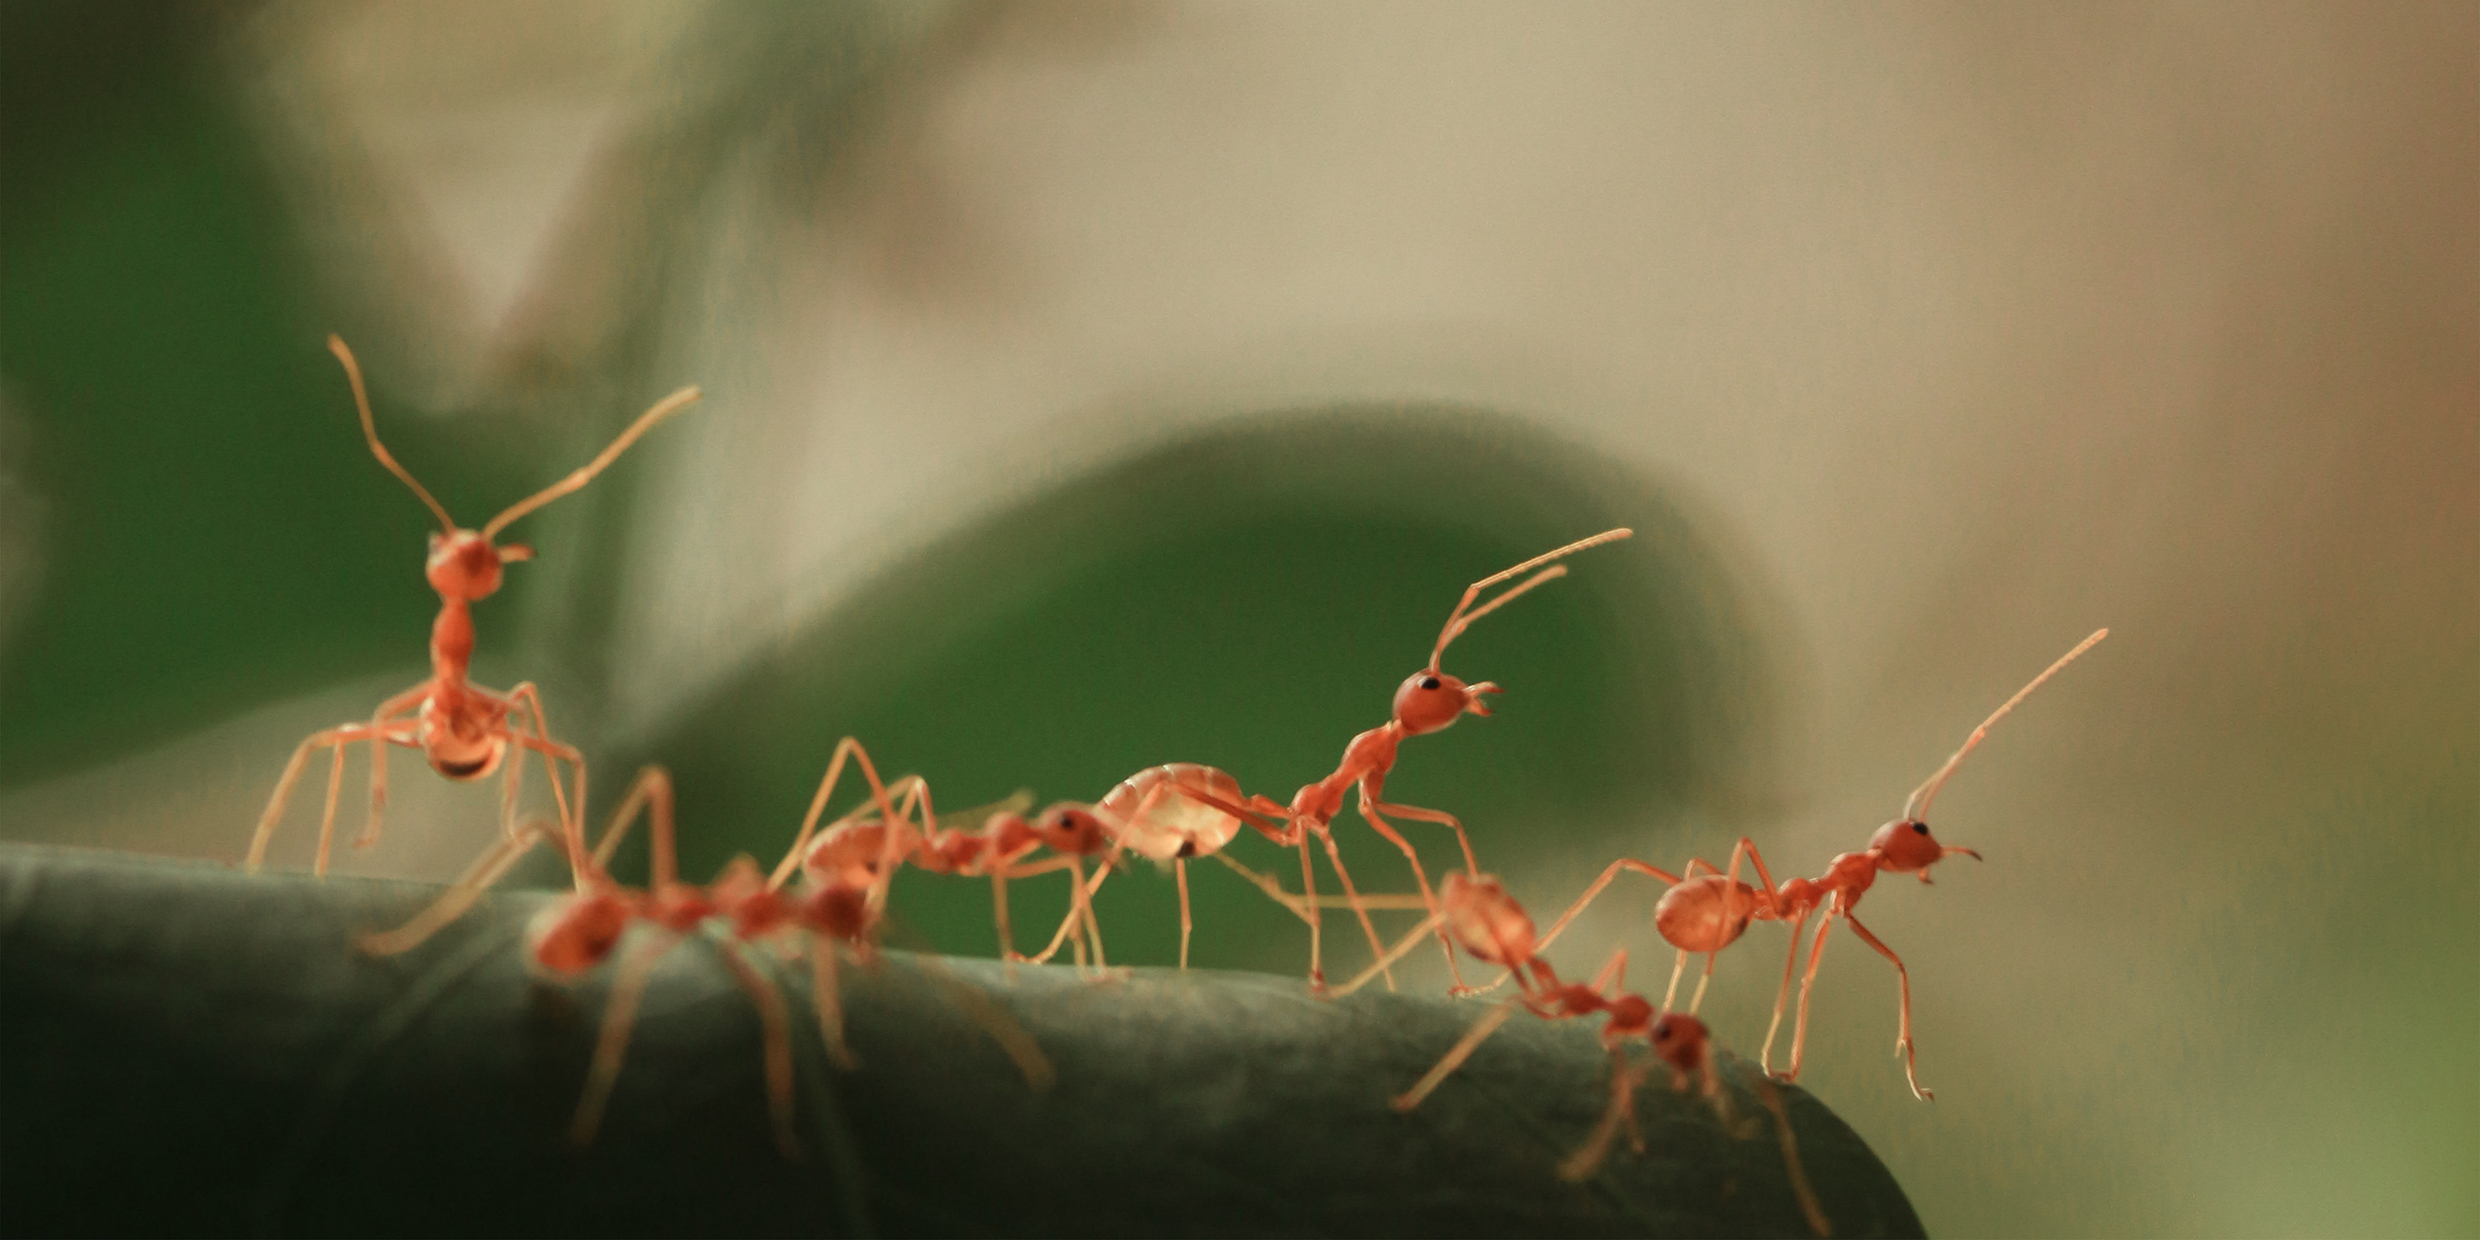 Close-up image of several ants